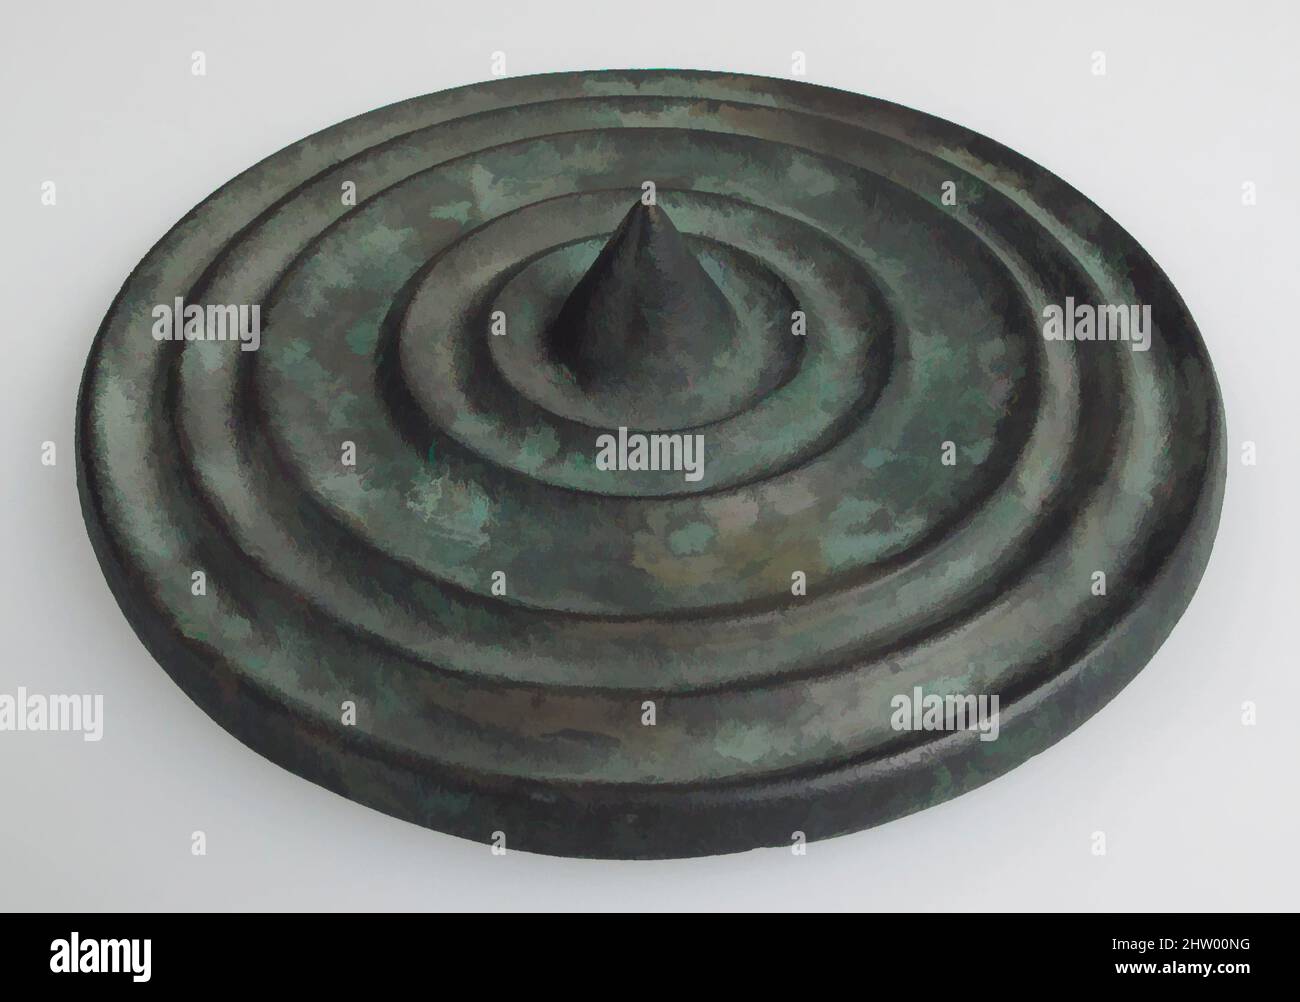 Art inspired by Disk, ca. 1000 B.C., Irish, Copper alloy, Overall: 4 3/4 x 7/8 in. (12.1 x 2.3 cm), Metalwork-Bronze, Classic works modernized by Artotop with a splash of modernity. Shapes, color and value, eye-catching visual impact on art. Emotions through freedom of artworks in a contemporary way. A timeless message pursuing a wildly creative new direction. Artists turning to the digital medium and creating the Artotop NFT Stock Photo